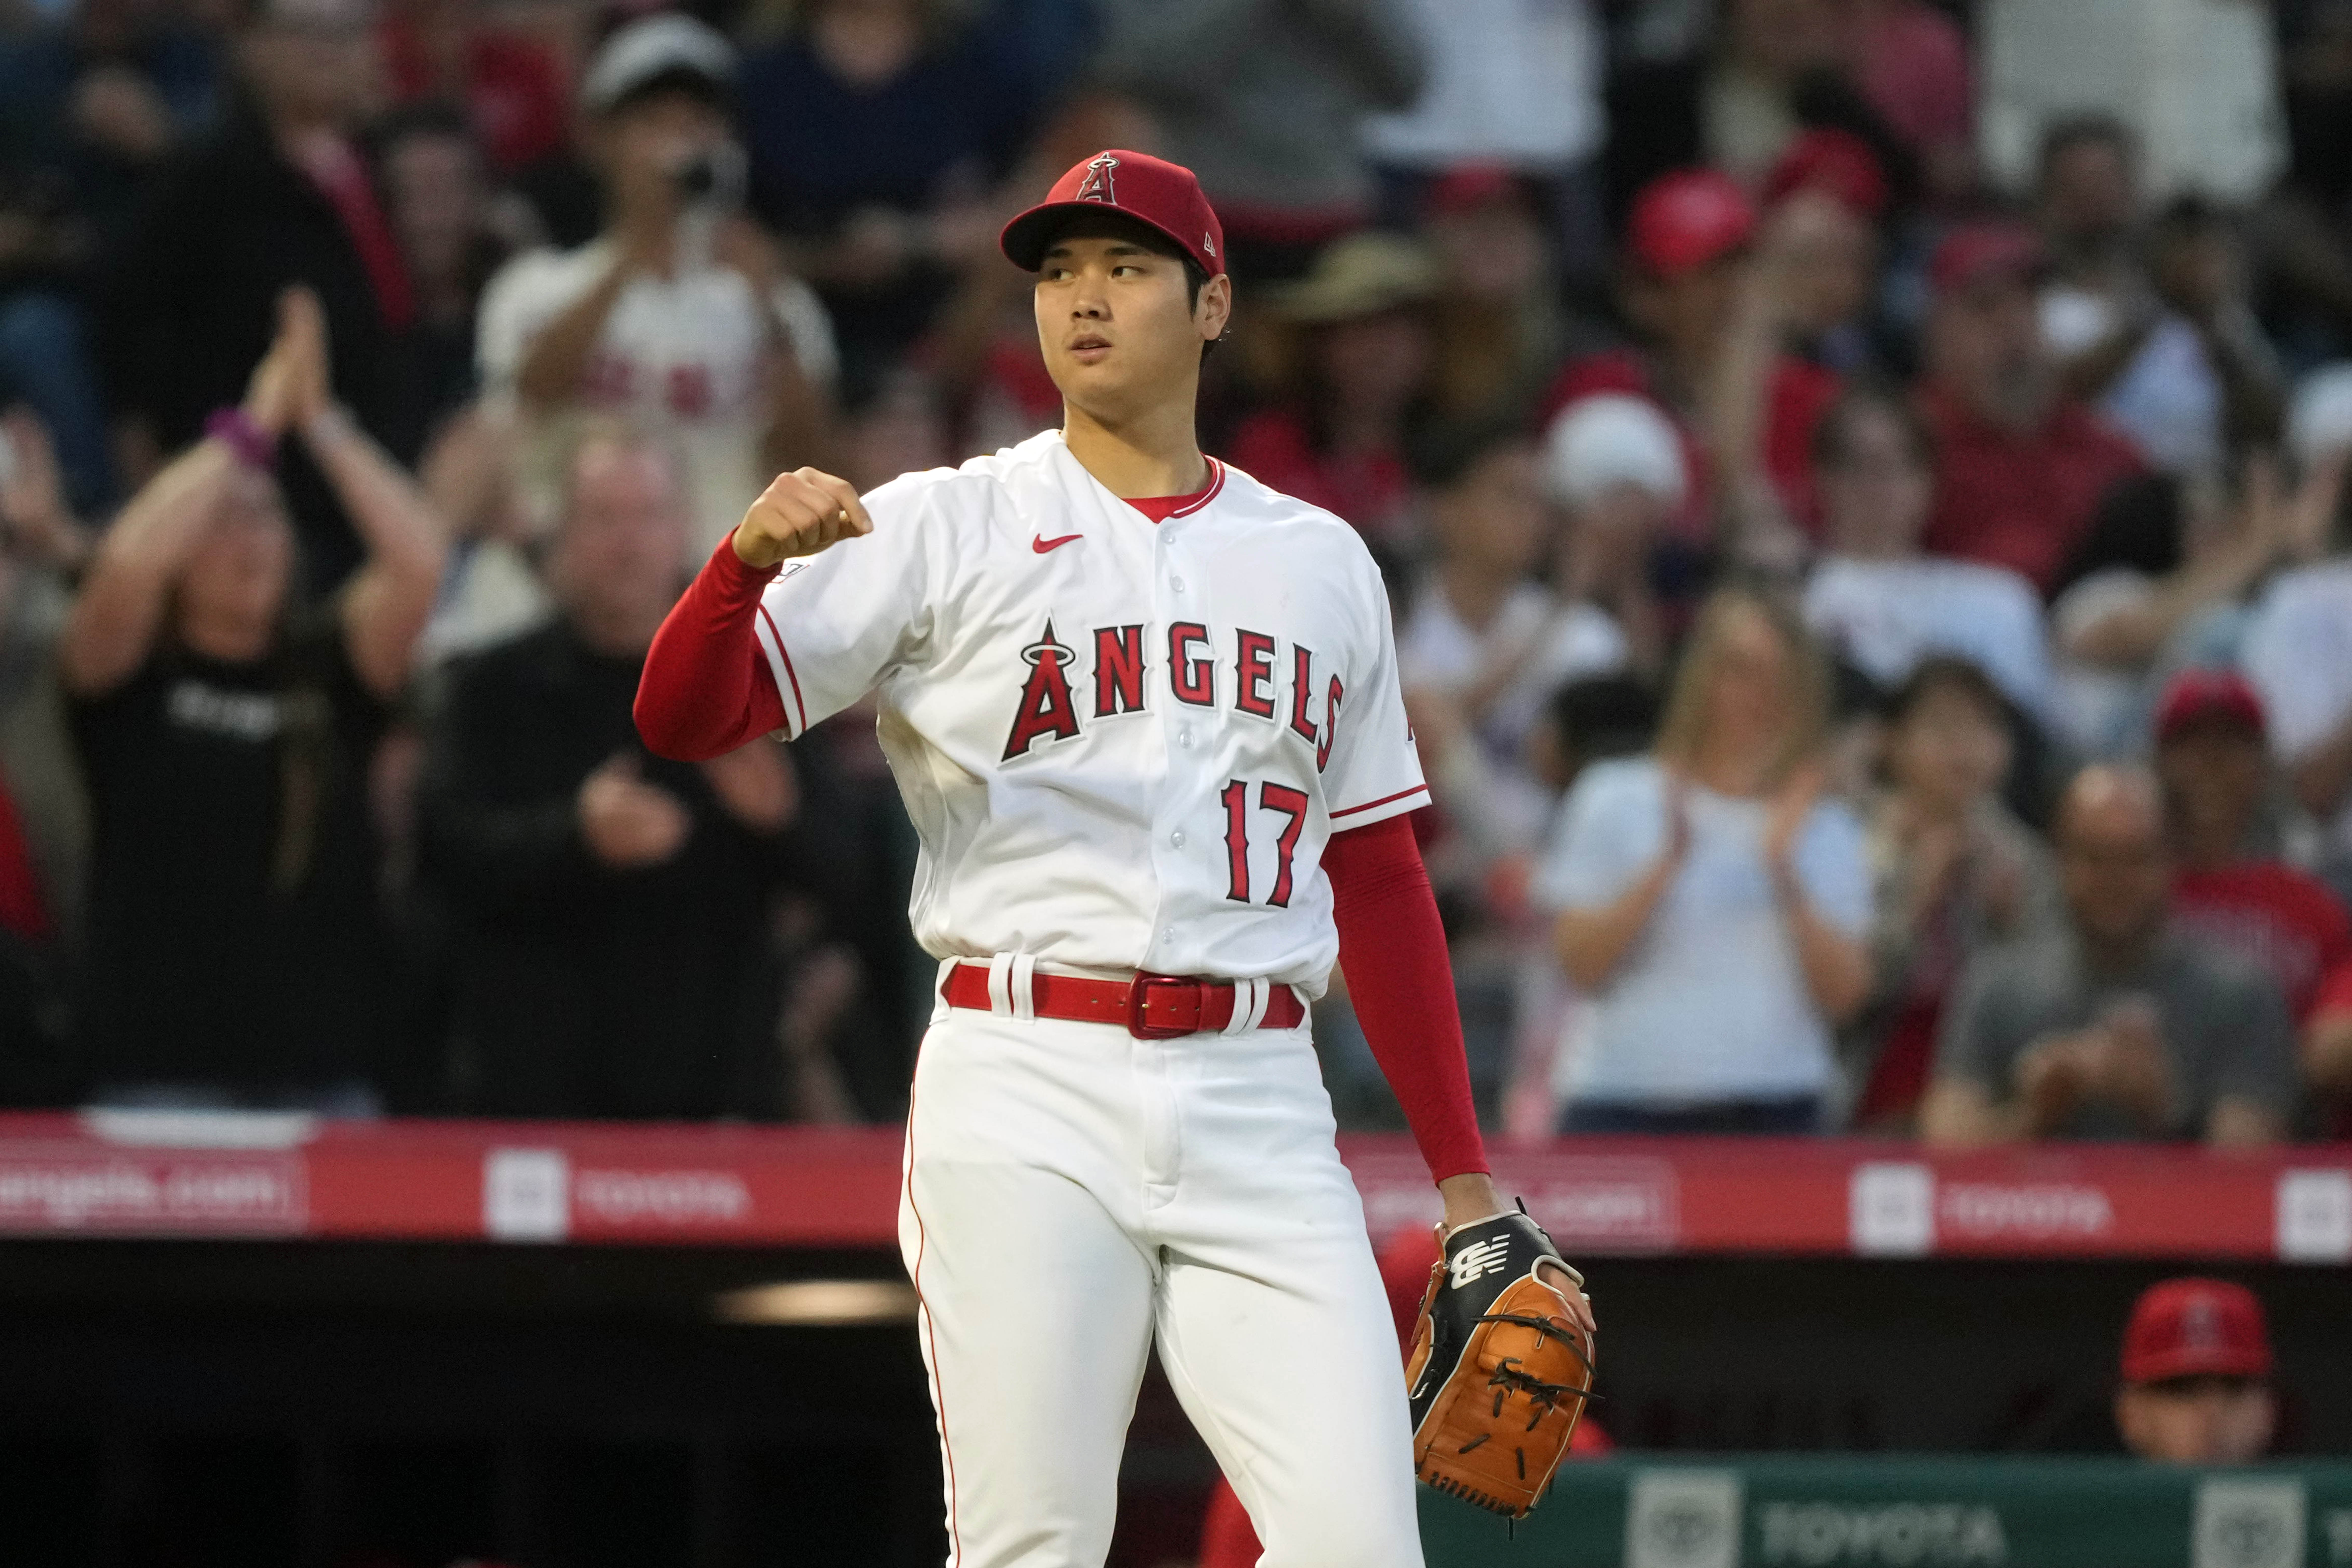 Los Angeles Angels starting pitcher Shohei Ohtani (17) celebrates at the end of the fifth inning against the Chicago White Sox at Angel Stadium.